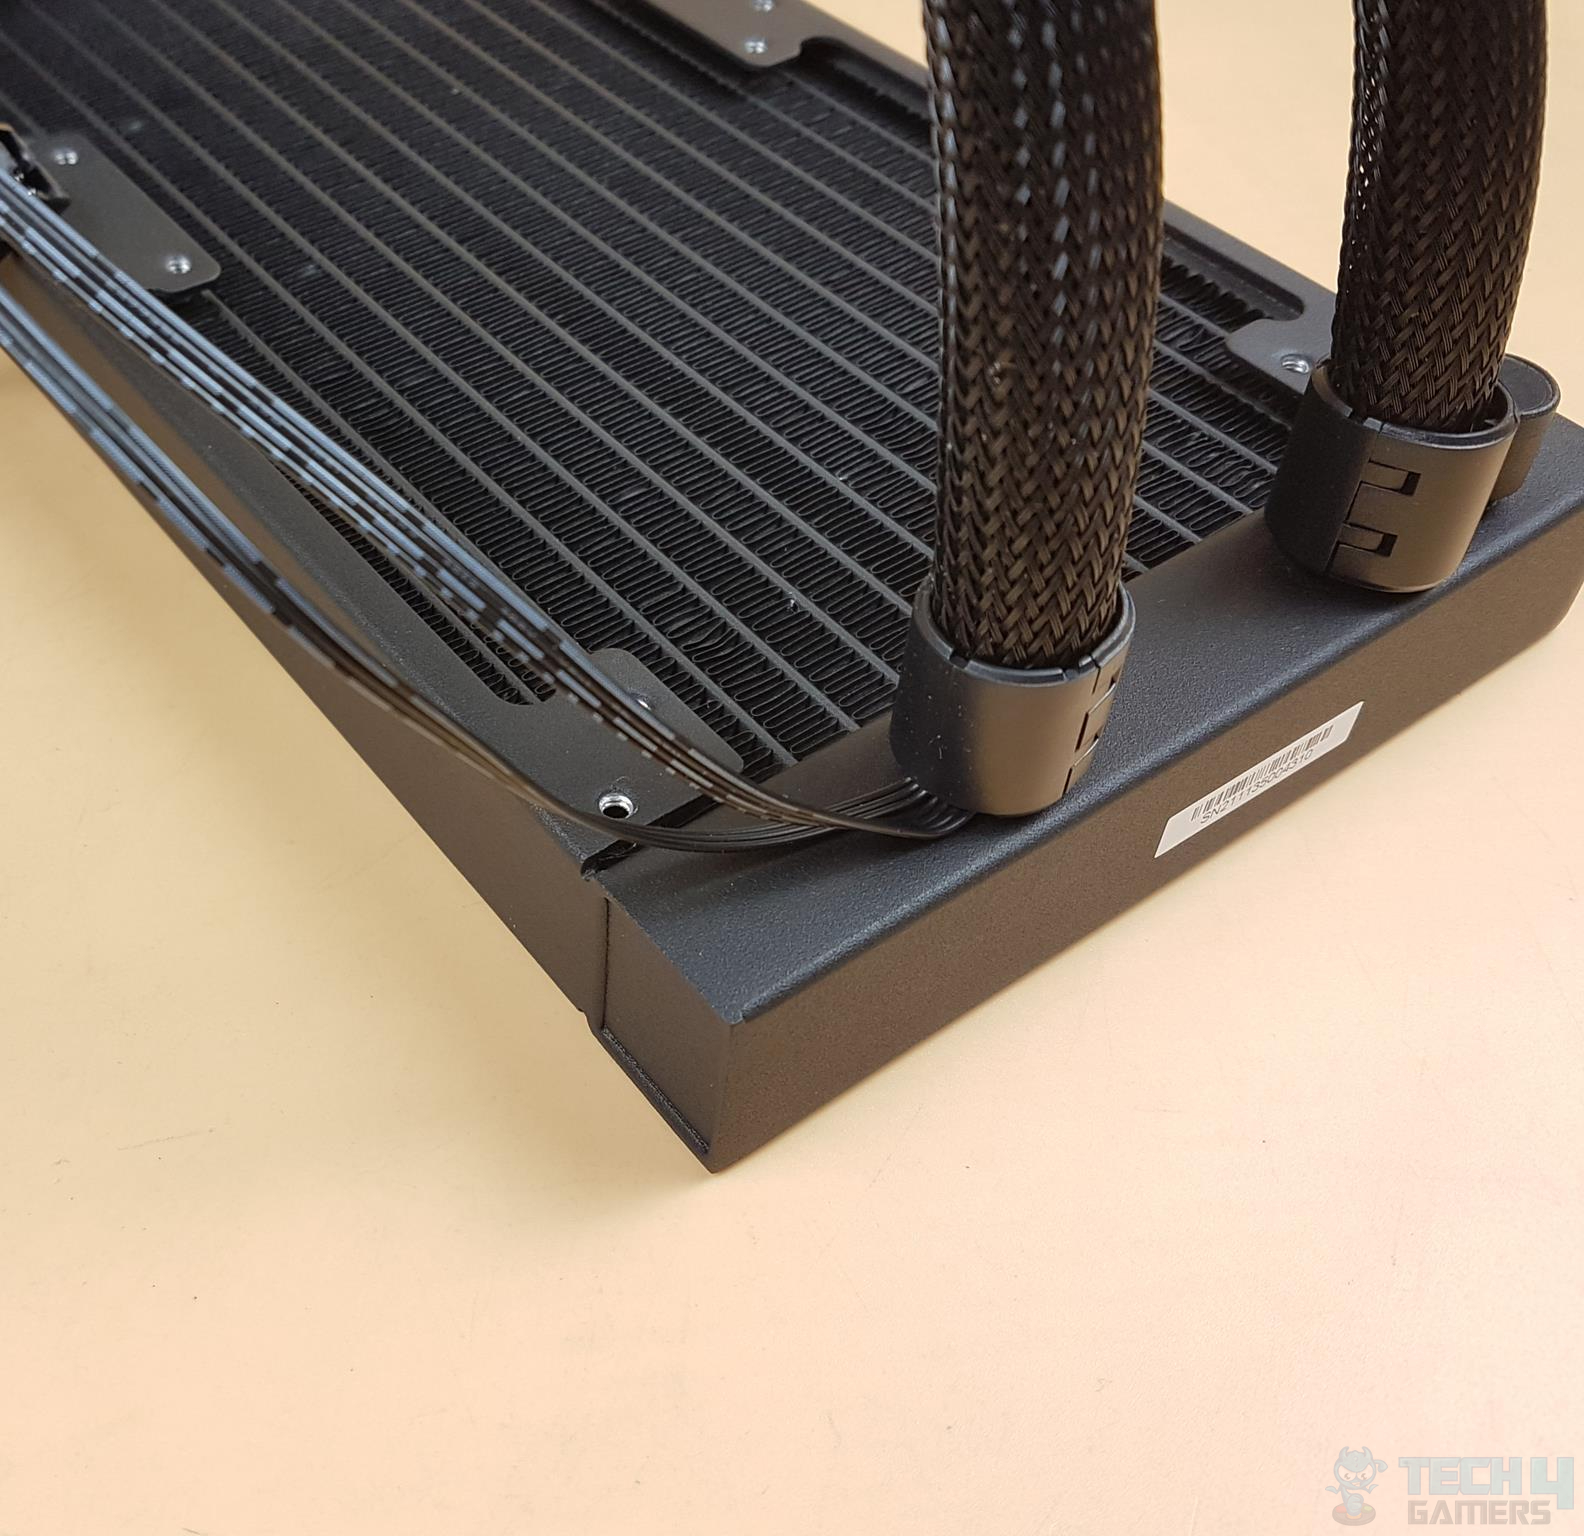 AORUS WATERFORCE X 280 Radiator Cable Management